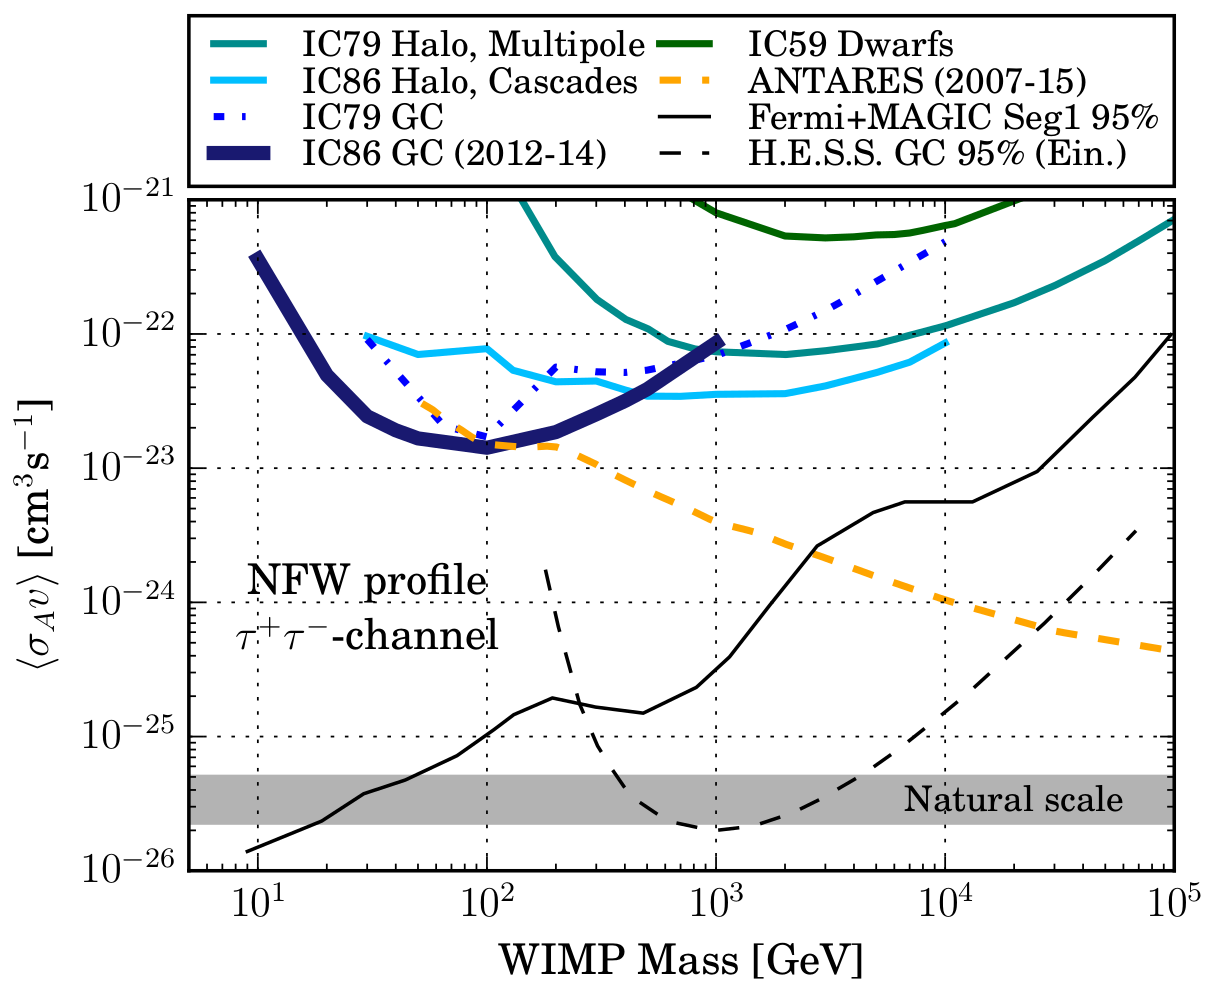 Plot of upper limits of the mass of WIMP dark matter candidates